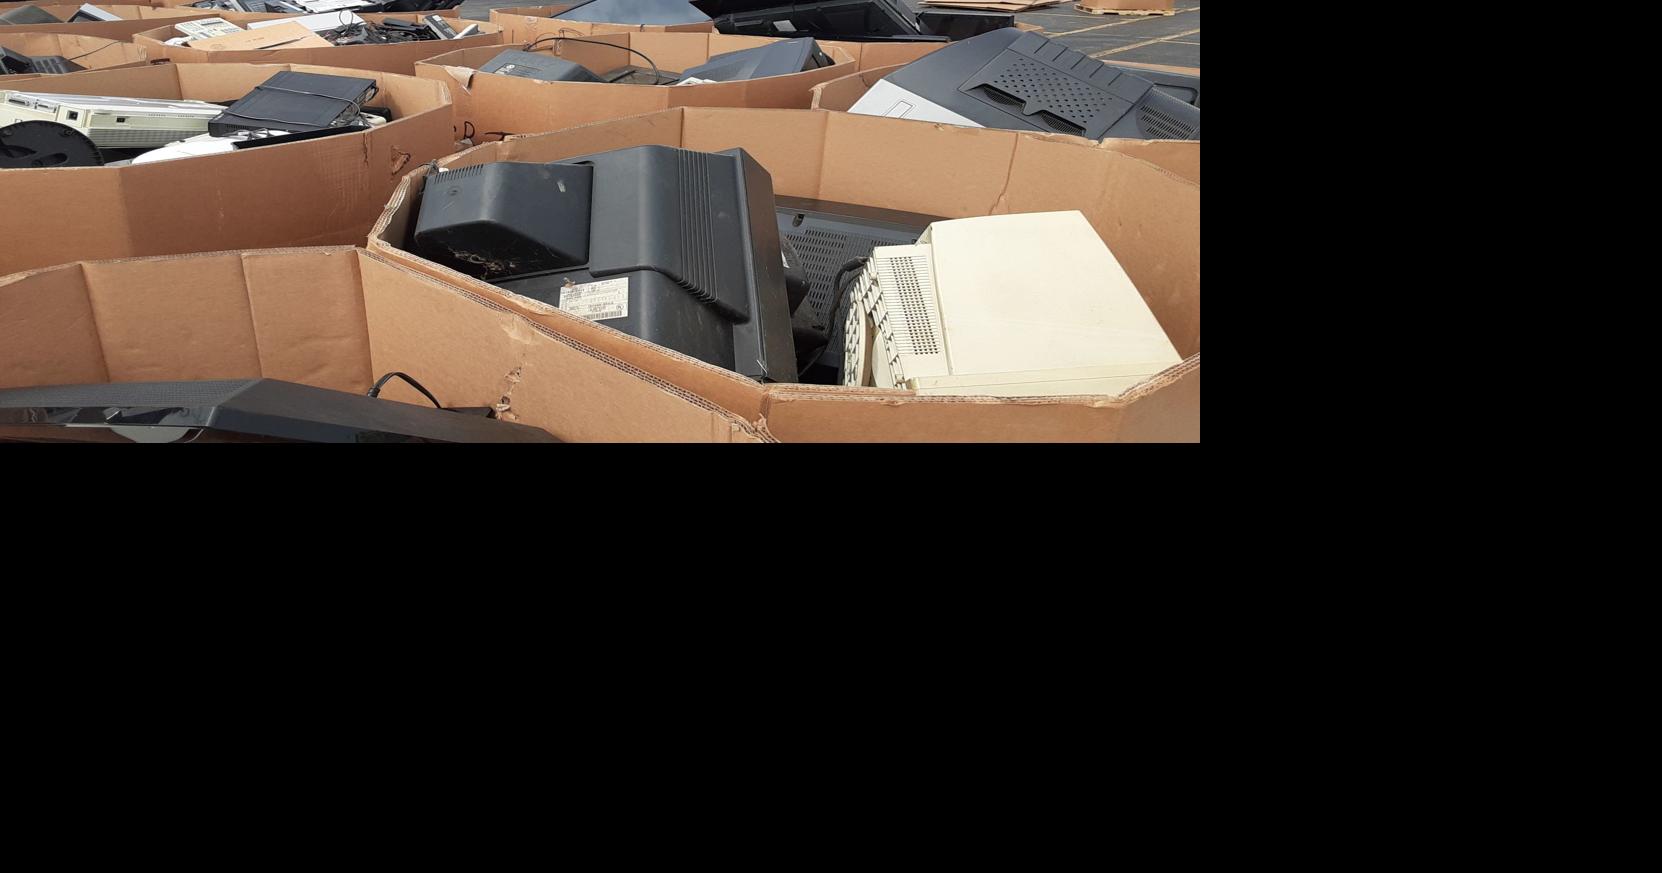 Coles County electronics recycling dropoff event fills up in less than